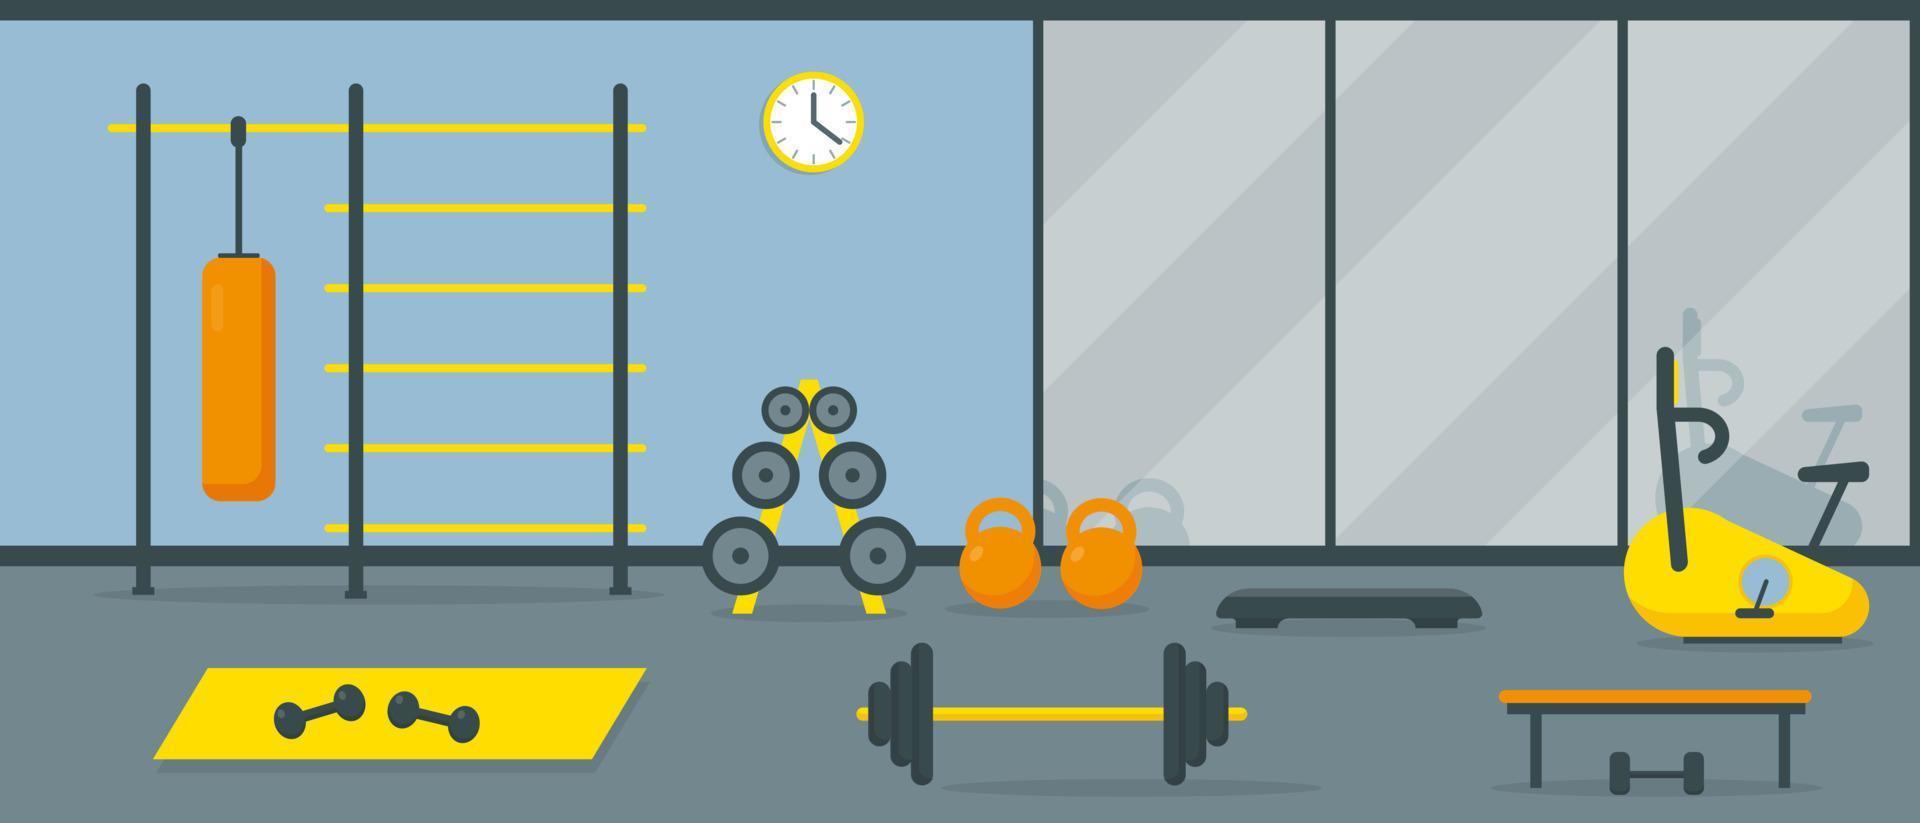 Gym interior with workout equipment and mirror. Fitness center training area. Vector illustration.